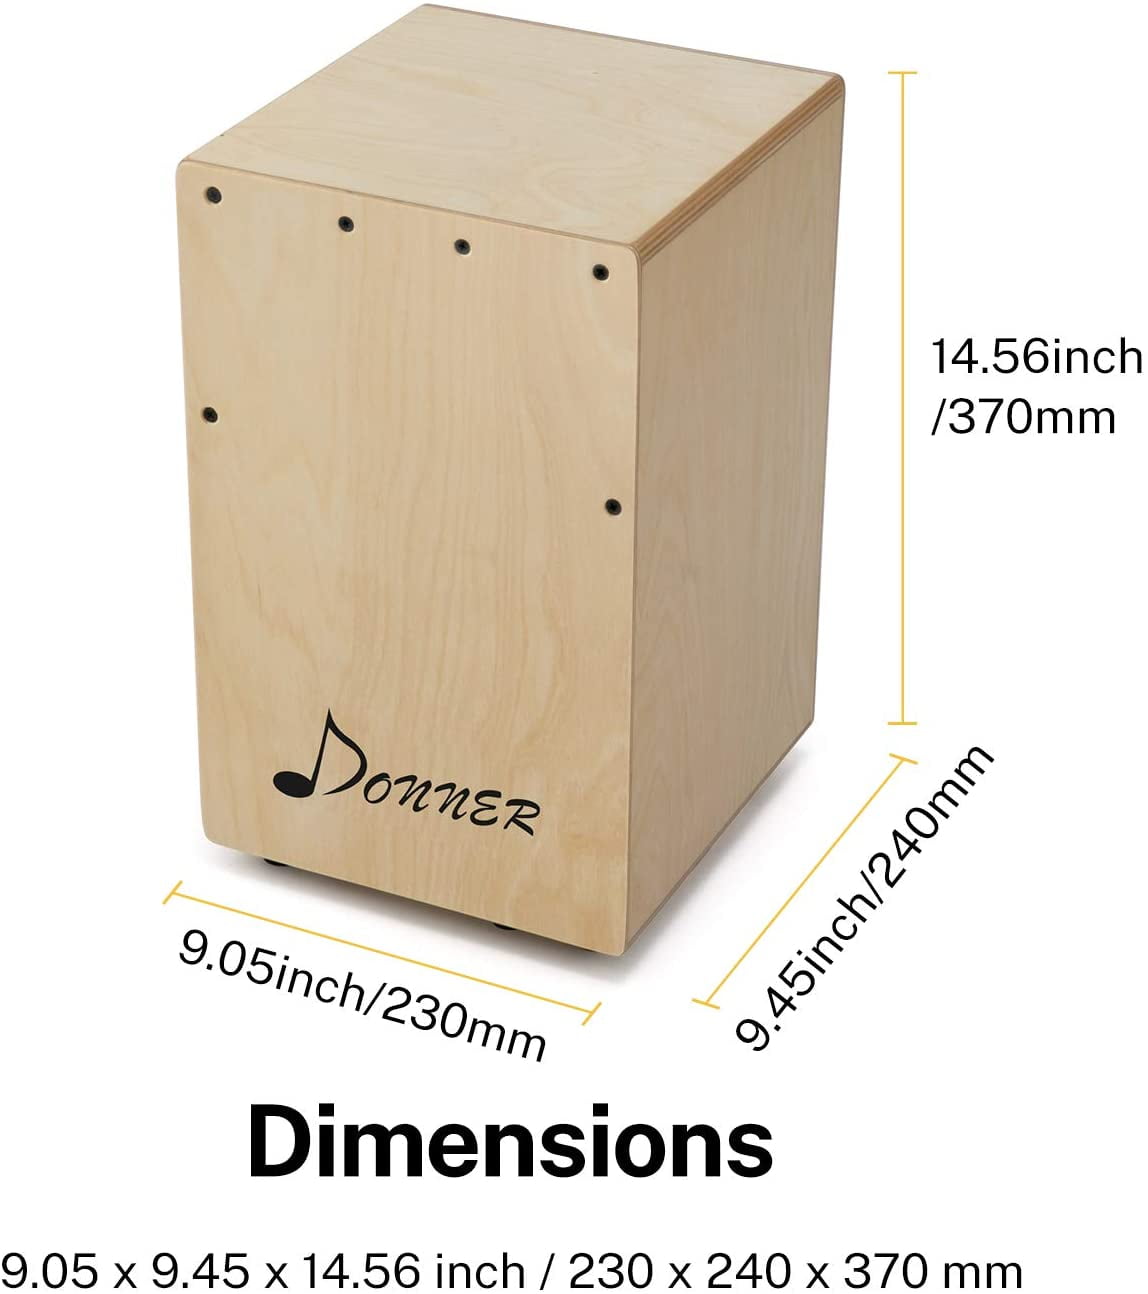 Donner Compact Size Cajon Box Drum with Internal Guitar Strings